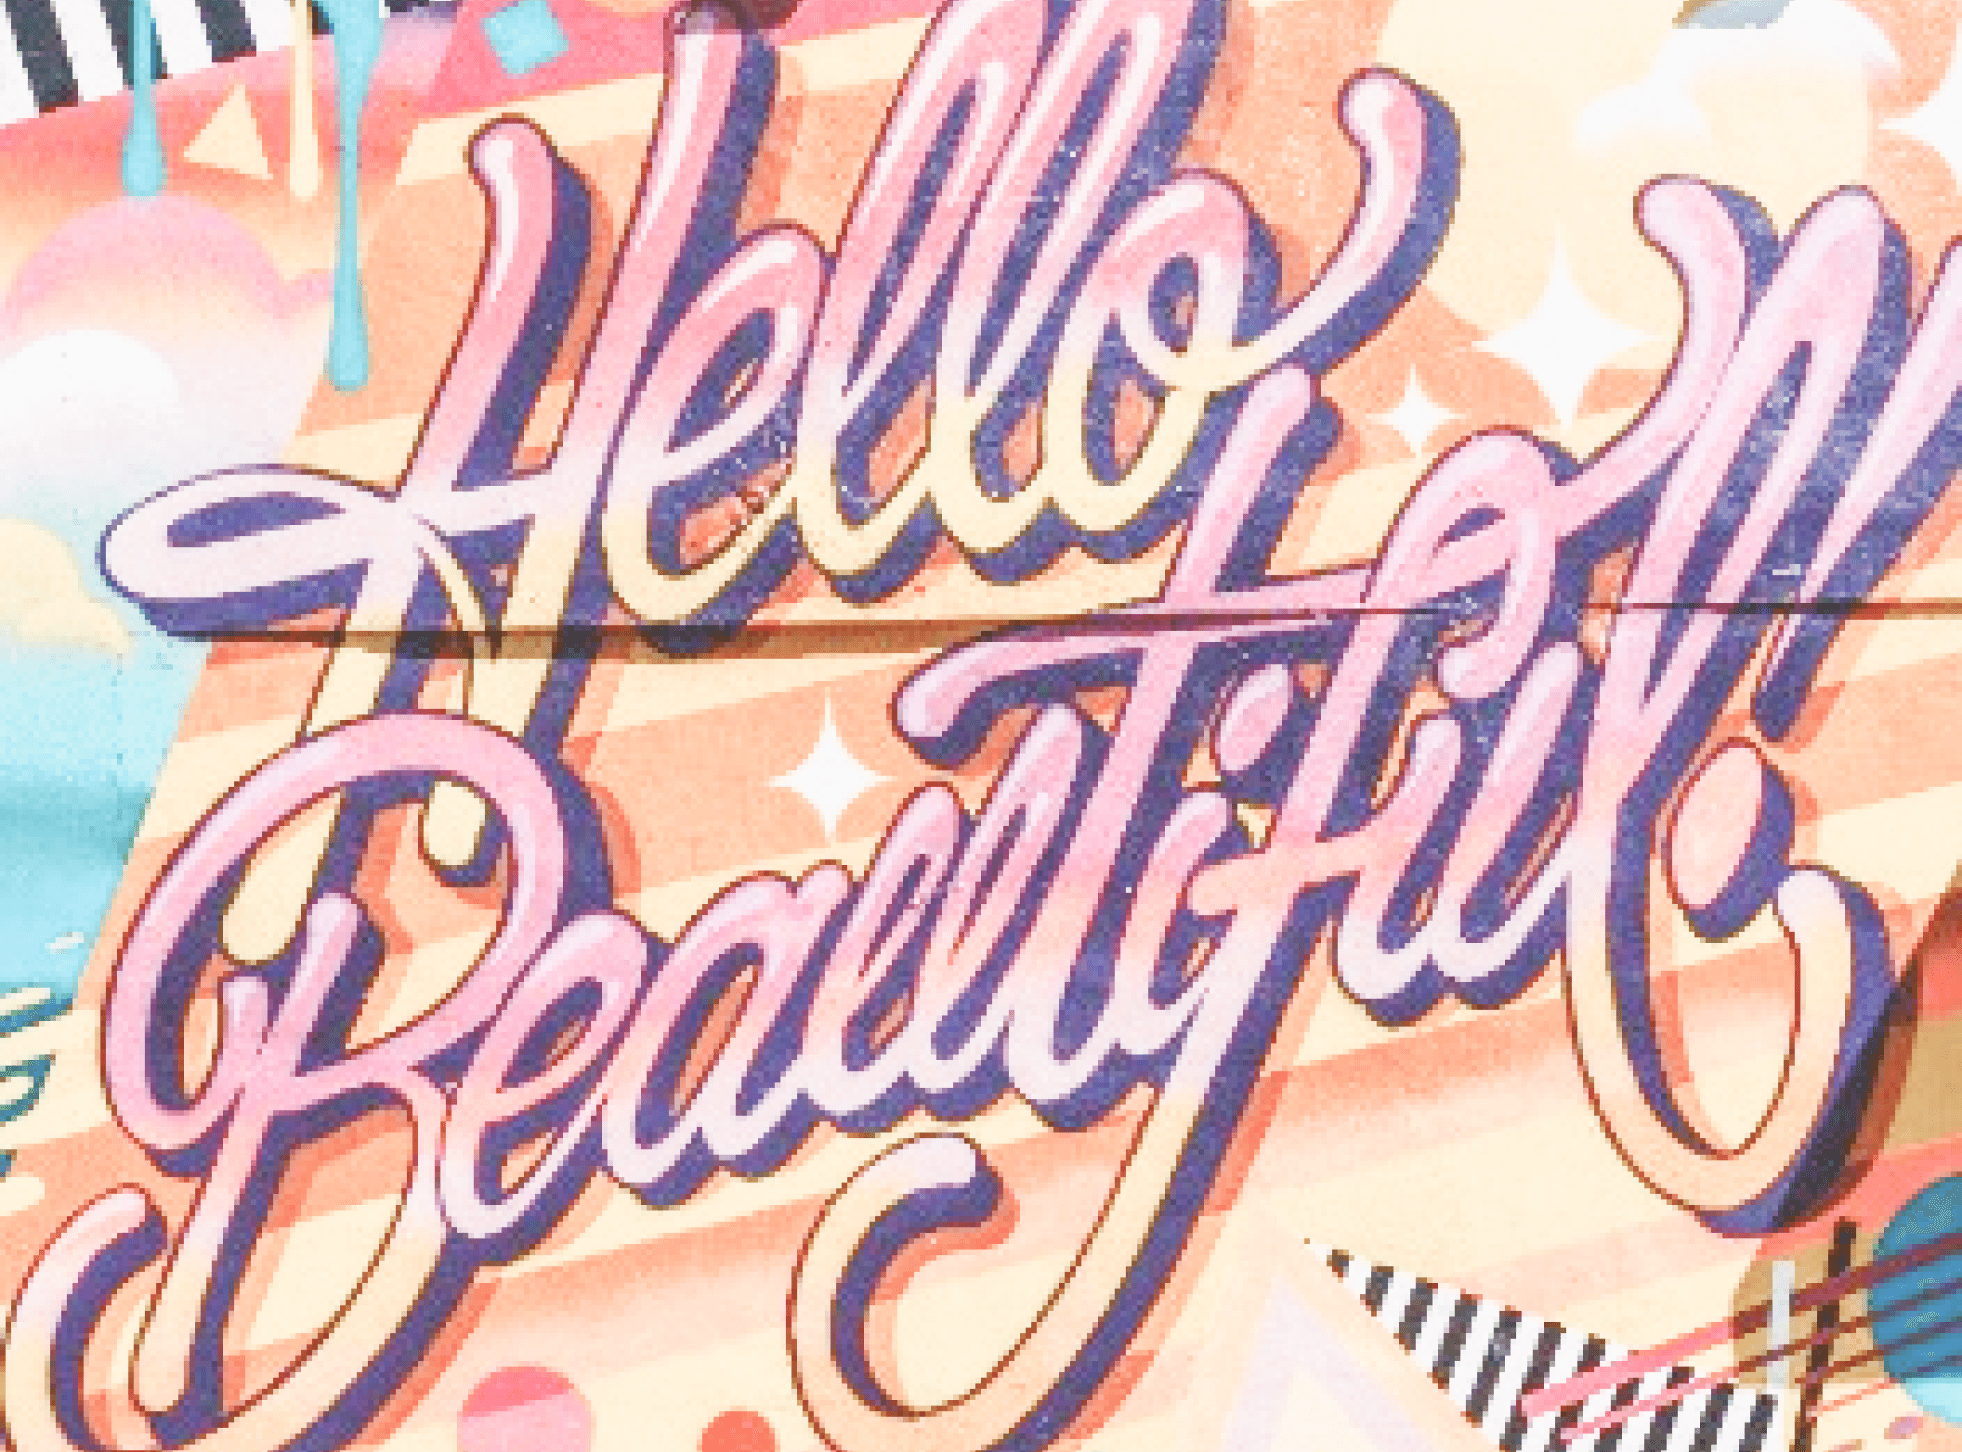 A photo of a mural with 'hello beautiful' words.